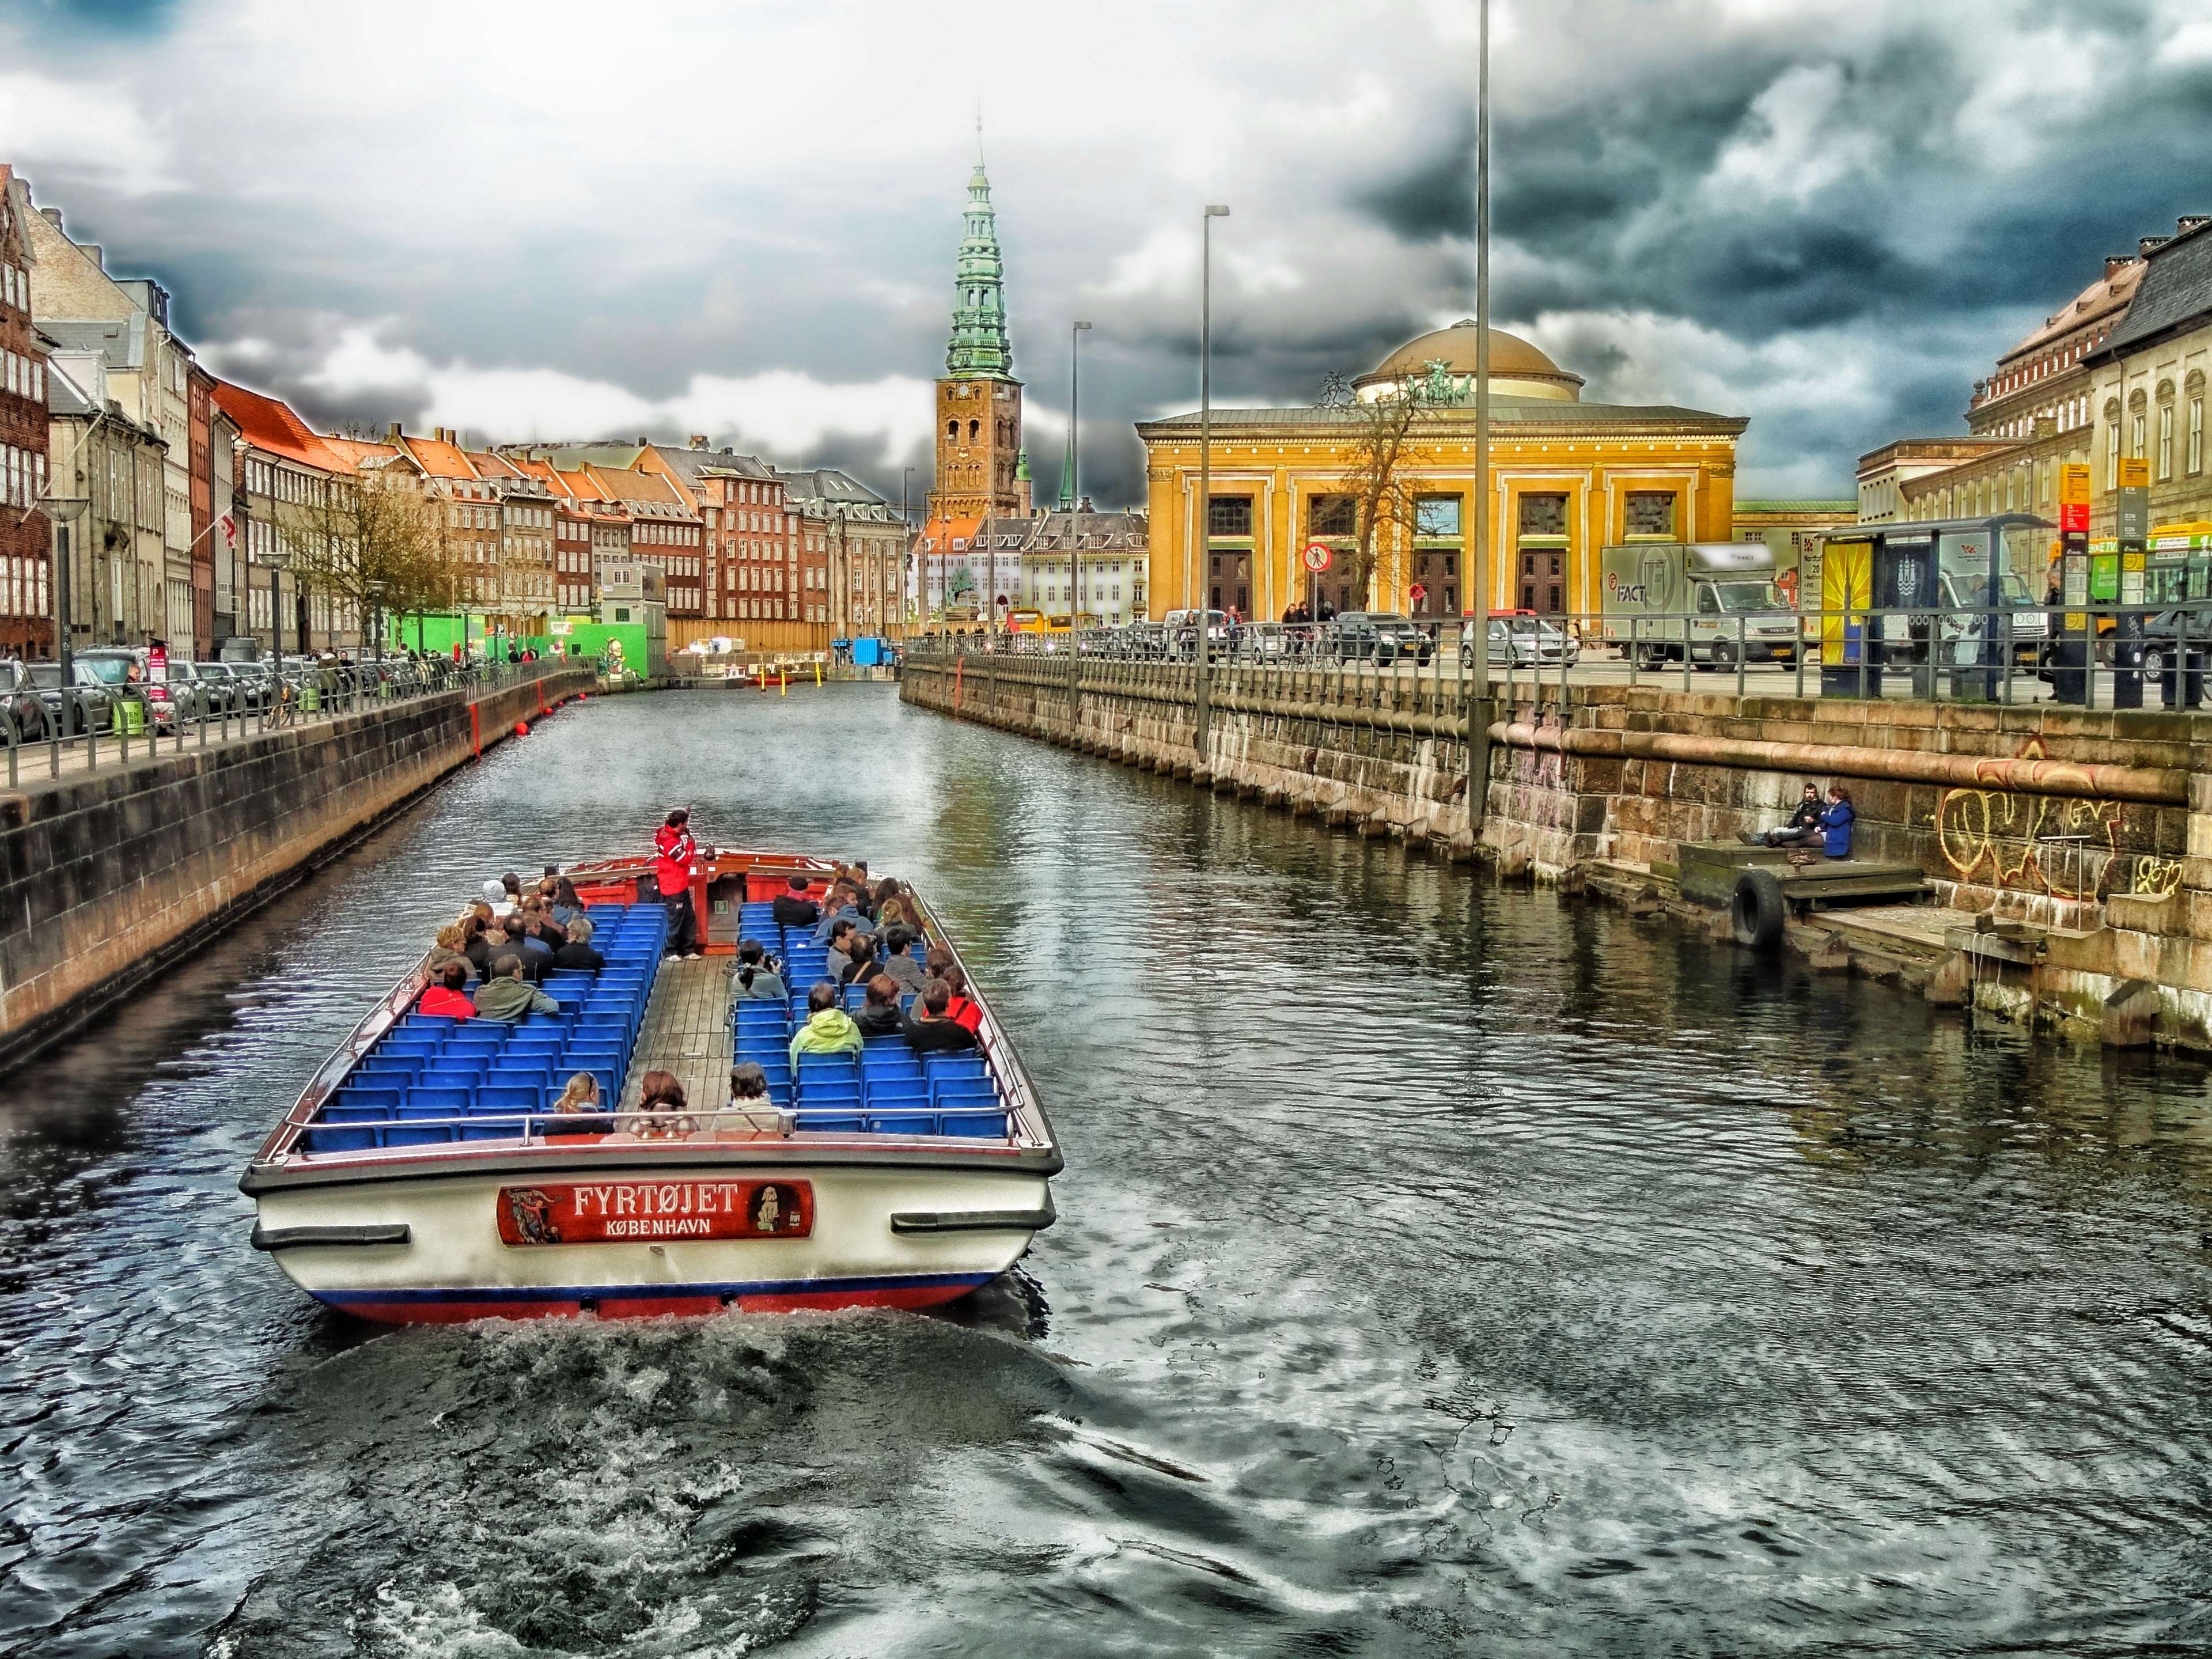 architecture, boat, buildings, canal, cities, city, clouds, copenhagen, denmark, hdr, royalty free, sky, tourists, urban, water 4k wallpaper